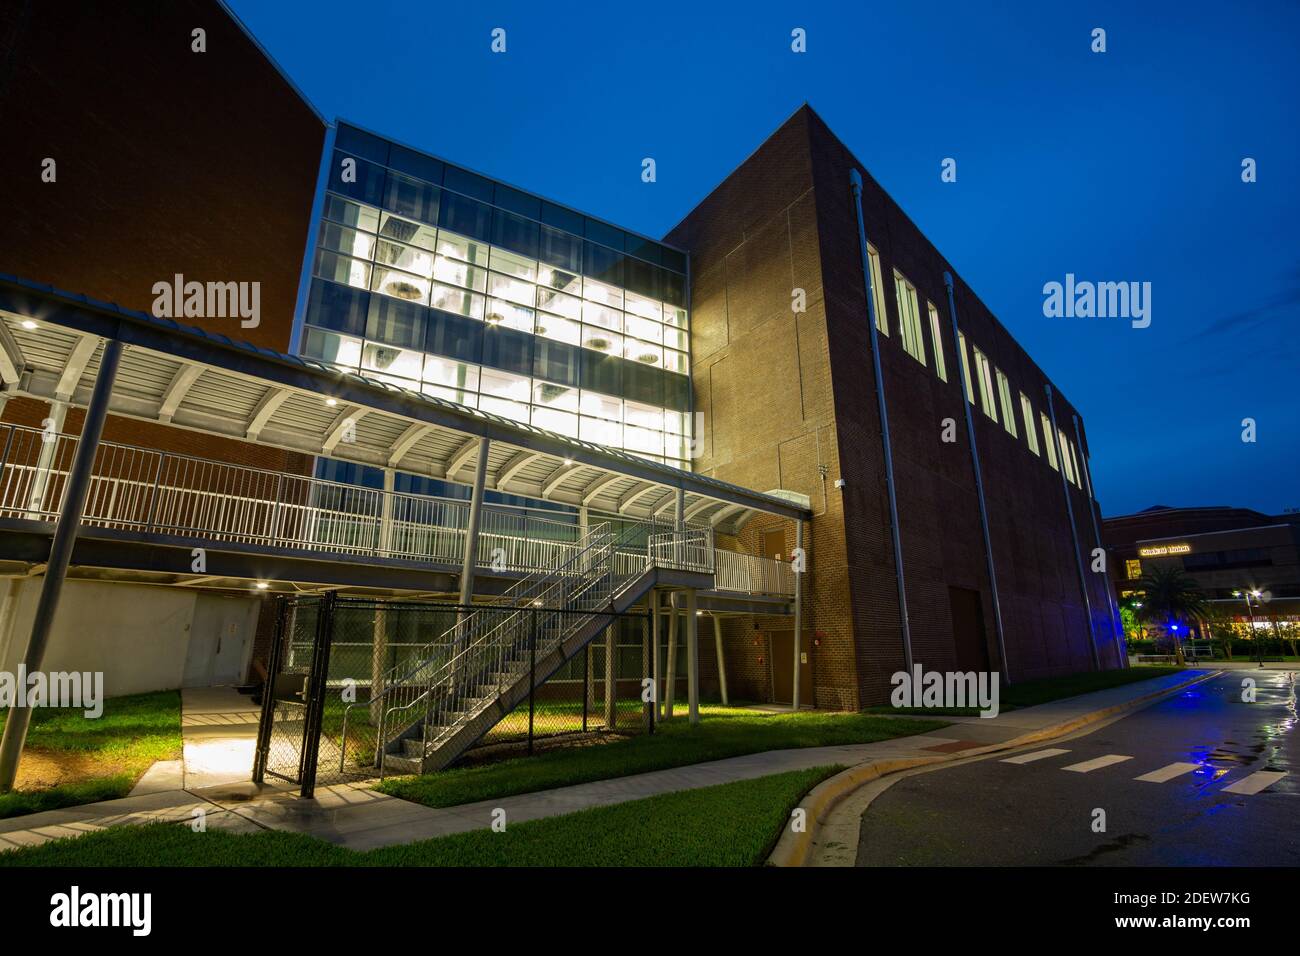 Sep. 9, 2020. A new building at the University of Central Florida stands unoccupied during the COVID-19 pandemic. Stock Photo